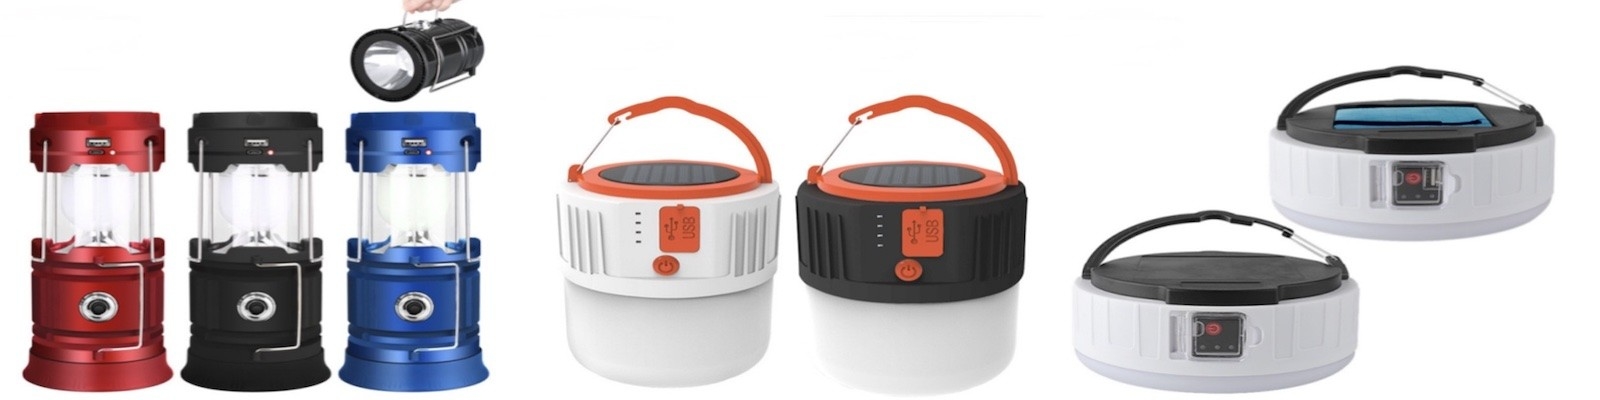 China best Portable Camping Lanterns on sales